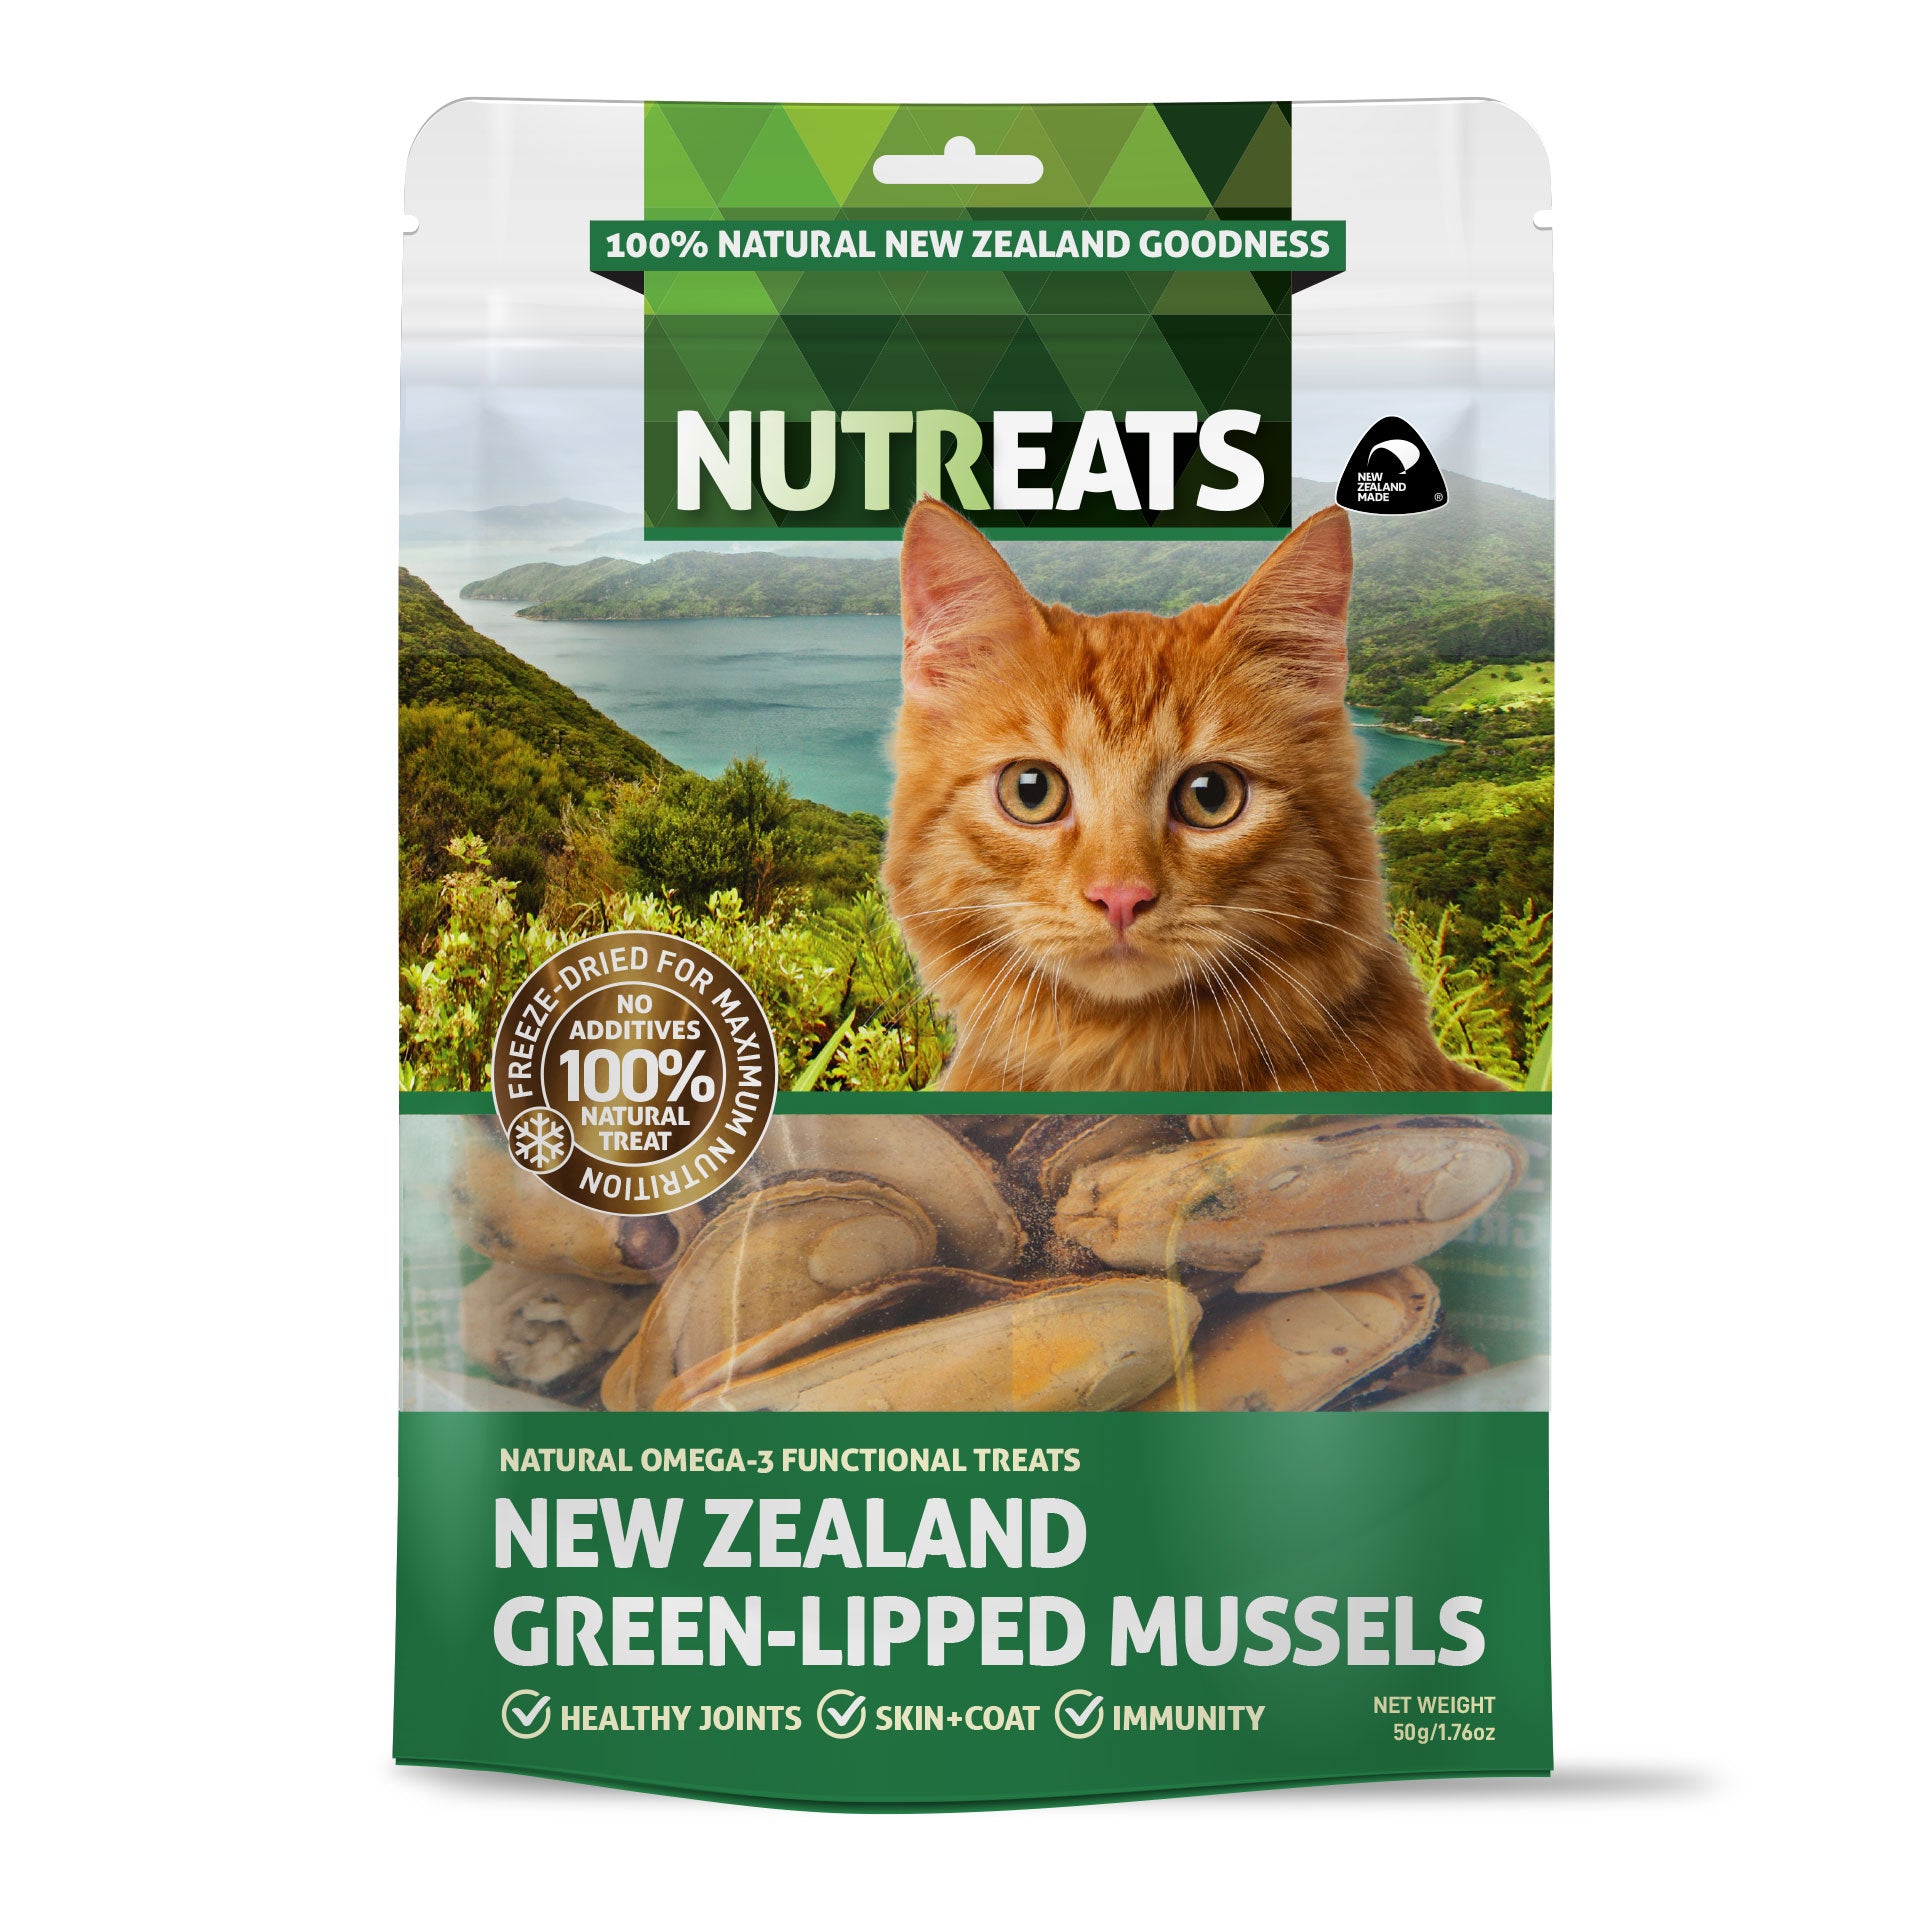 100% natural nutritional supplement treat for cats. New Zealand Green-lipped mussels. Freeze-dried and 100% natural. Great for supporting healthy joints, ski and glossy coat and may help support immunity. Natural Omega-3 functional treats.